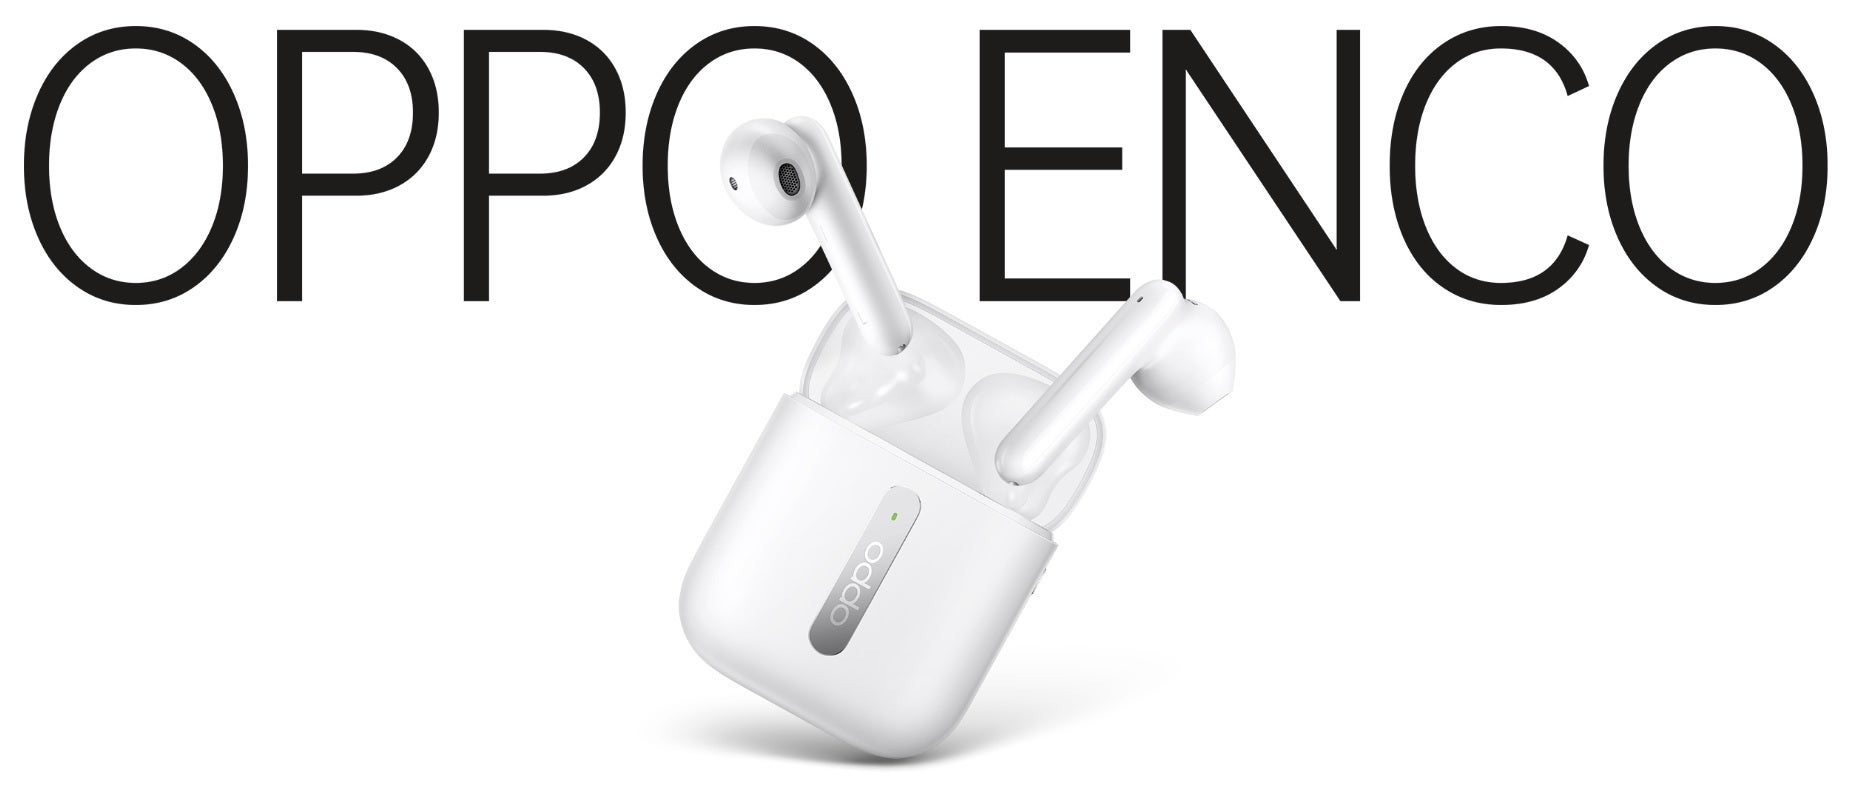 The Oppo Enco Free wireless earbuds resemble the sketch in Max J.'s tweet seen at the top of this article - OnePlus will allegedly unveil truly wireless earbuds